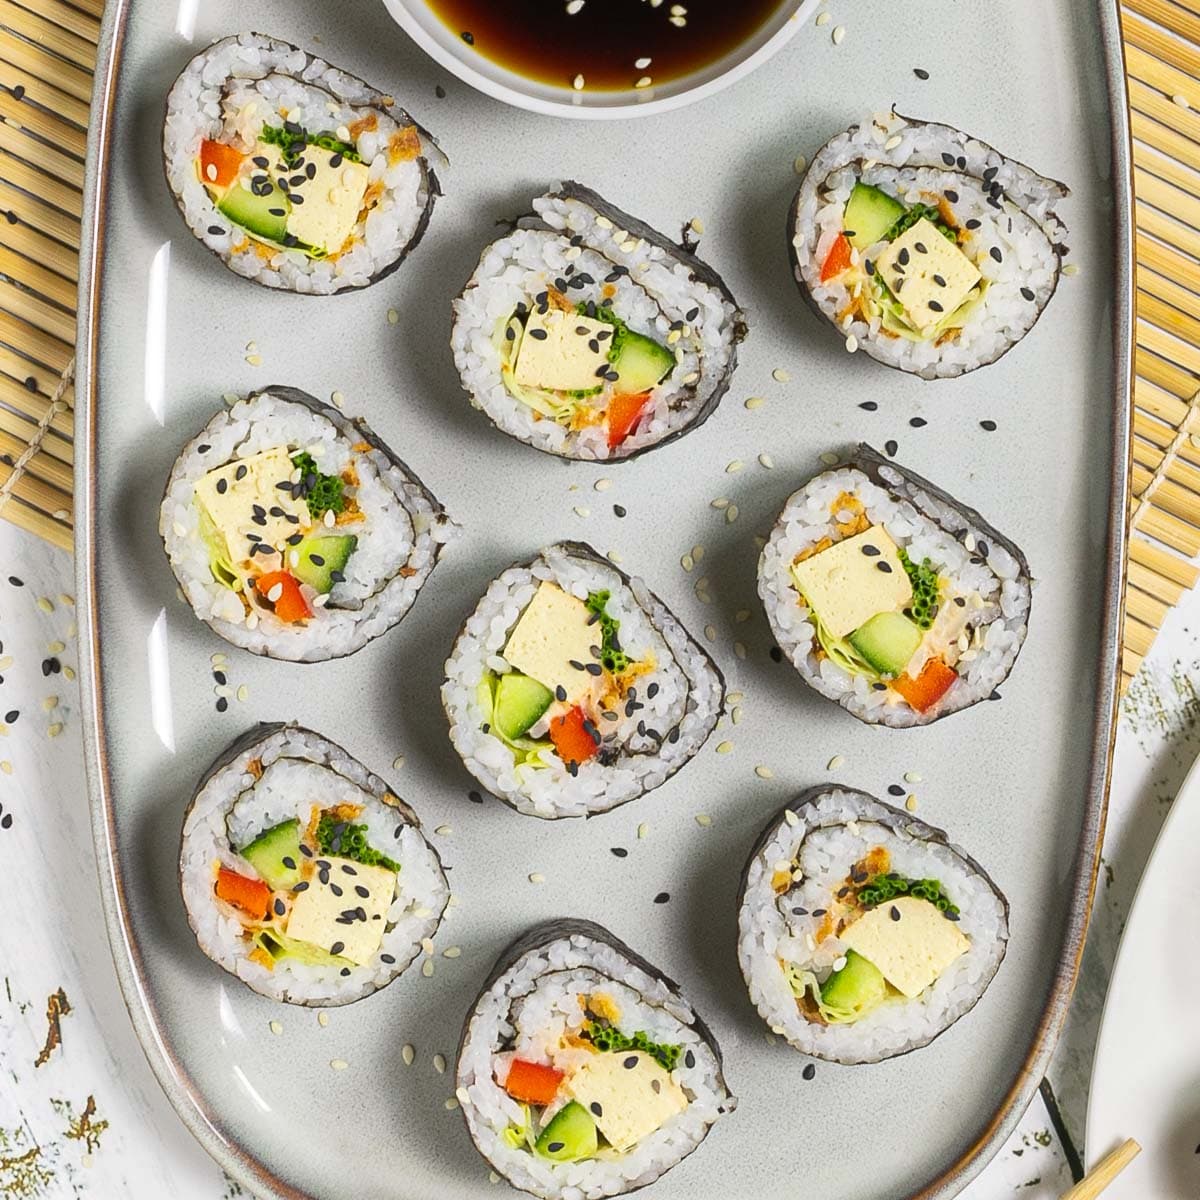 An oval, light blue plate with 9 tofu sushi rolls with colorful filling wrapped in dark seaweed sheets. Served with a small bowl of soy sauce and sprinkled with dark and white sesame seeds.